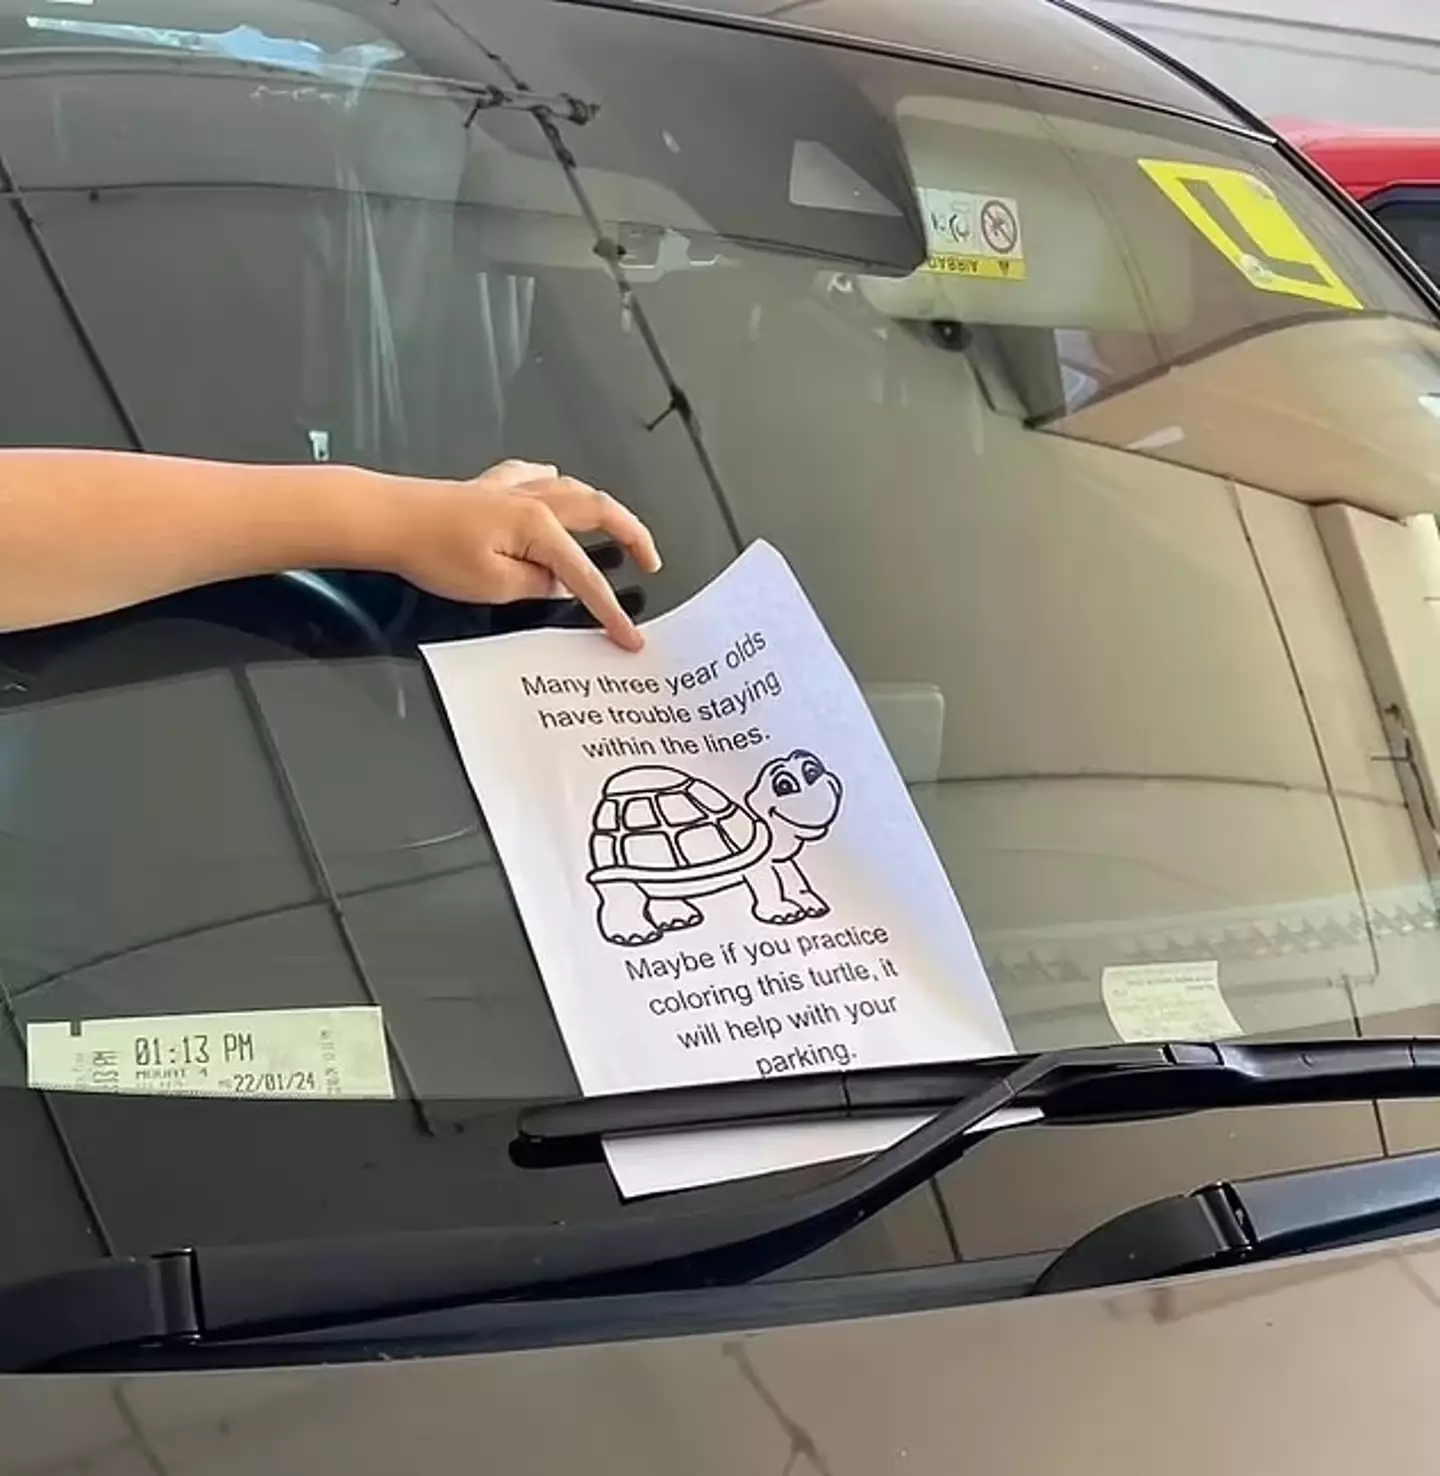 The note in question was left on the windscreen of a Mazda sedan parked at the Galleria Shopping Centre in Morley, Australia.